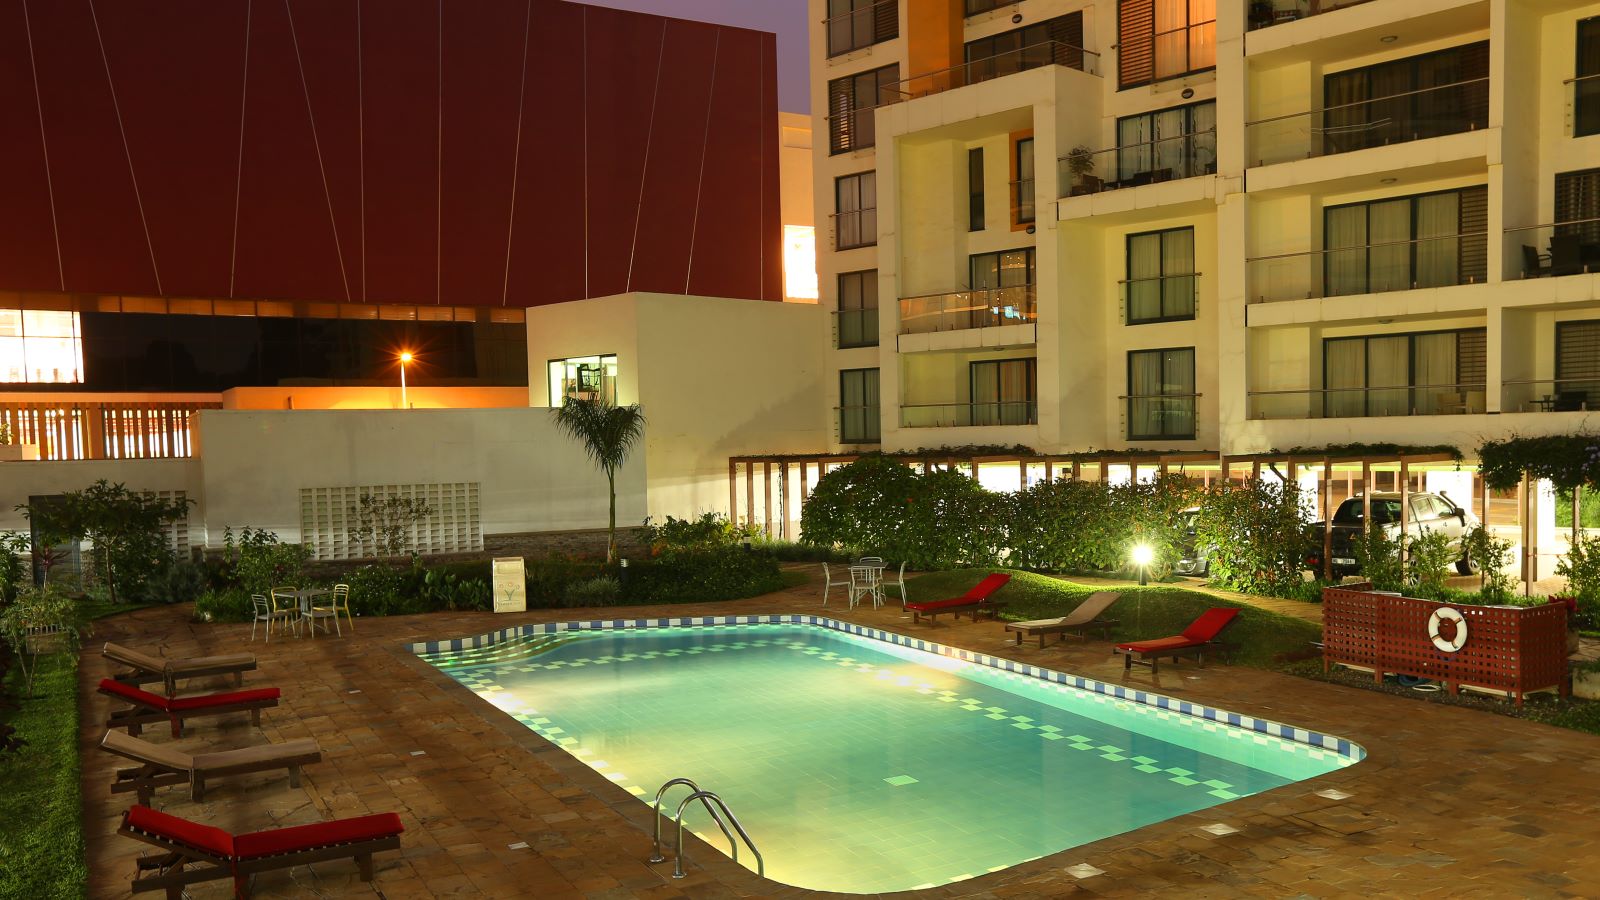 Night View of Garden City Outdoor Pool - Mace Group